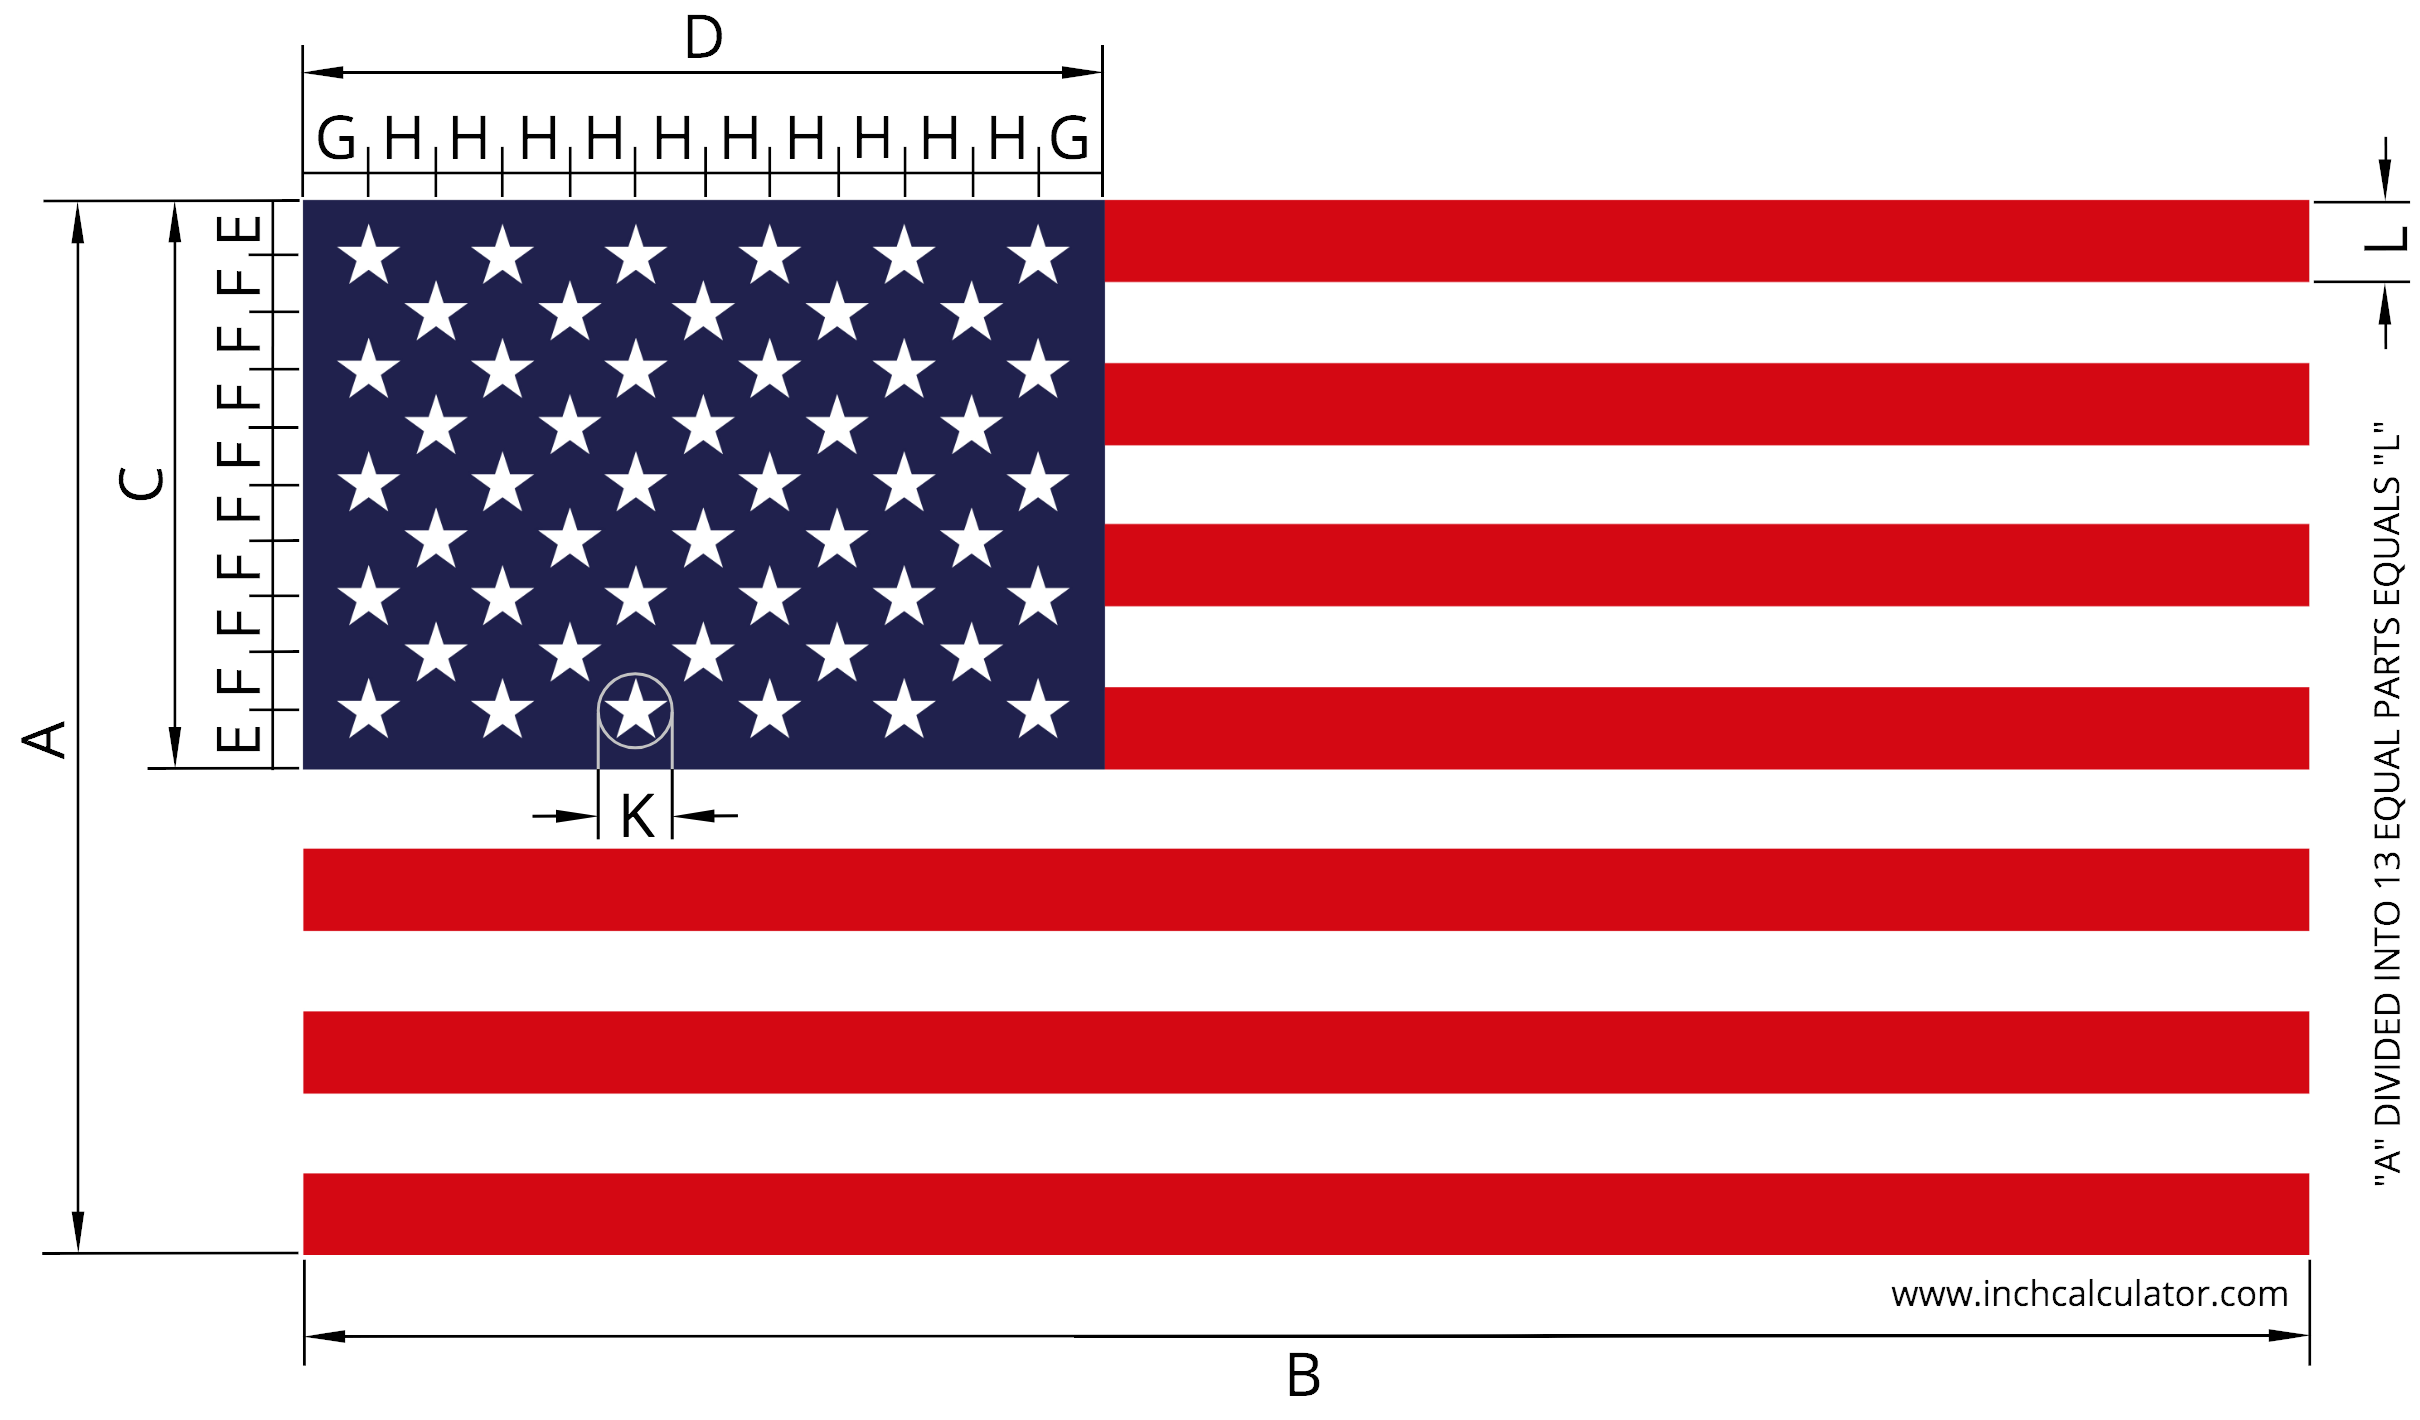 https://www.inchcalculator.com/wp-content/uploads/2018/12/flag-proportions.png